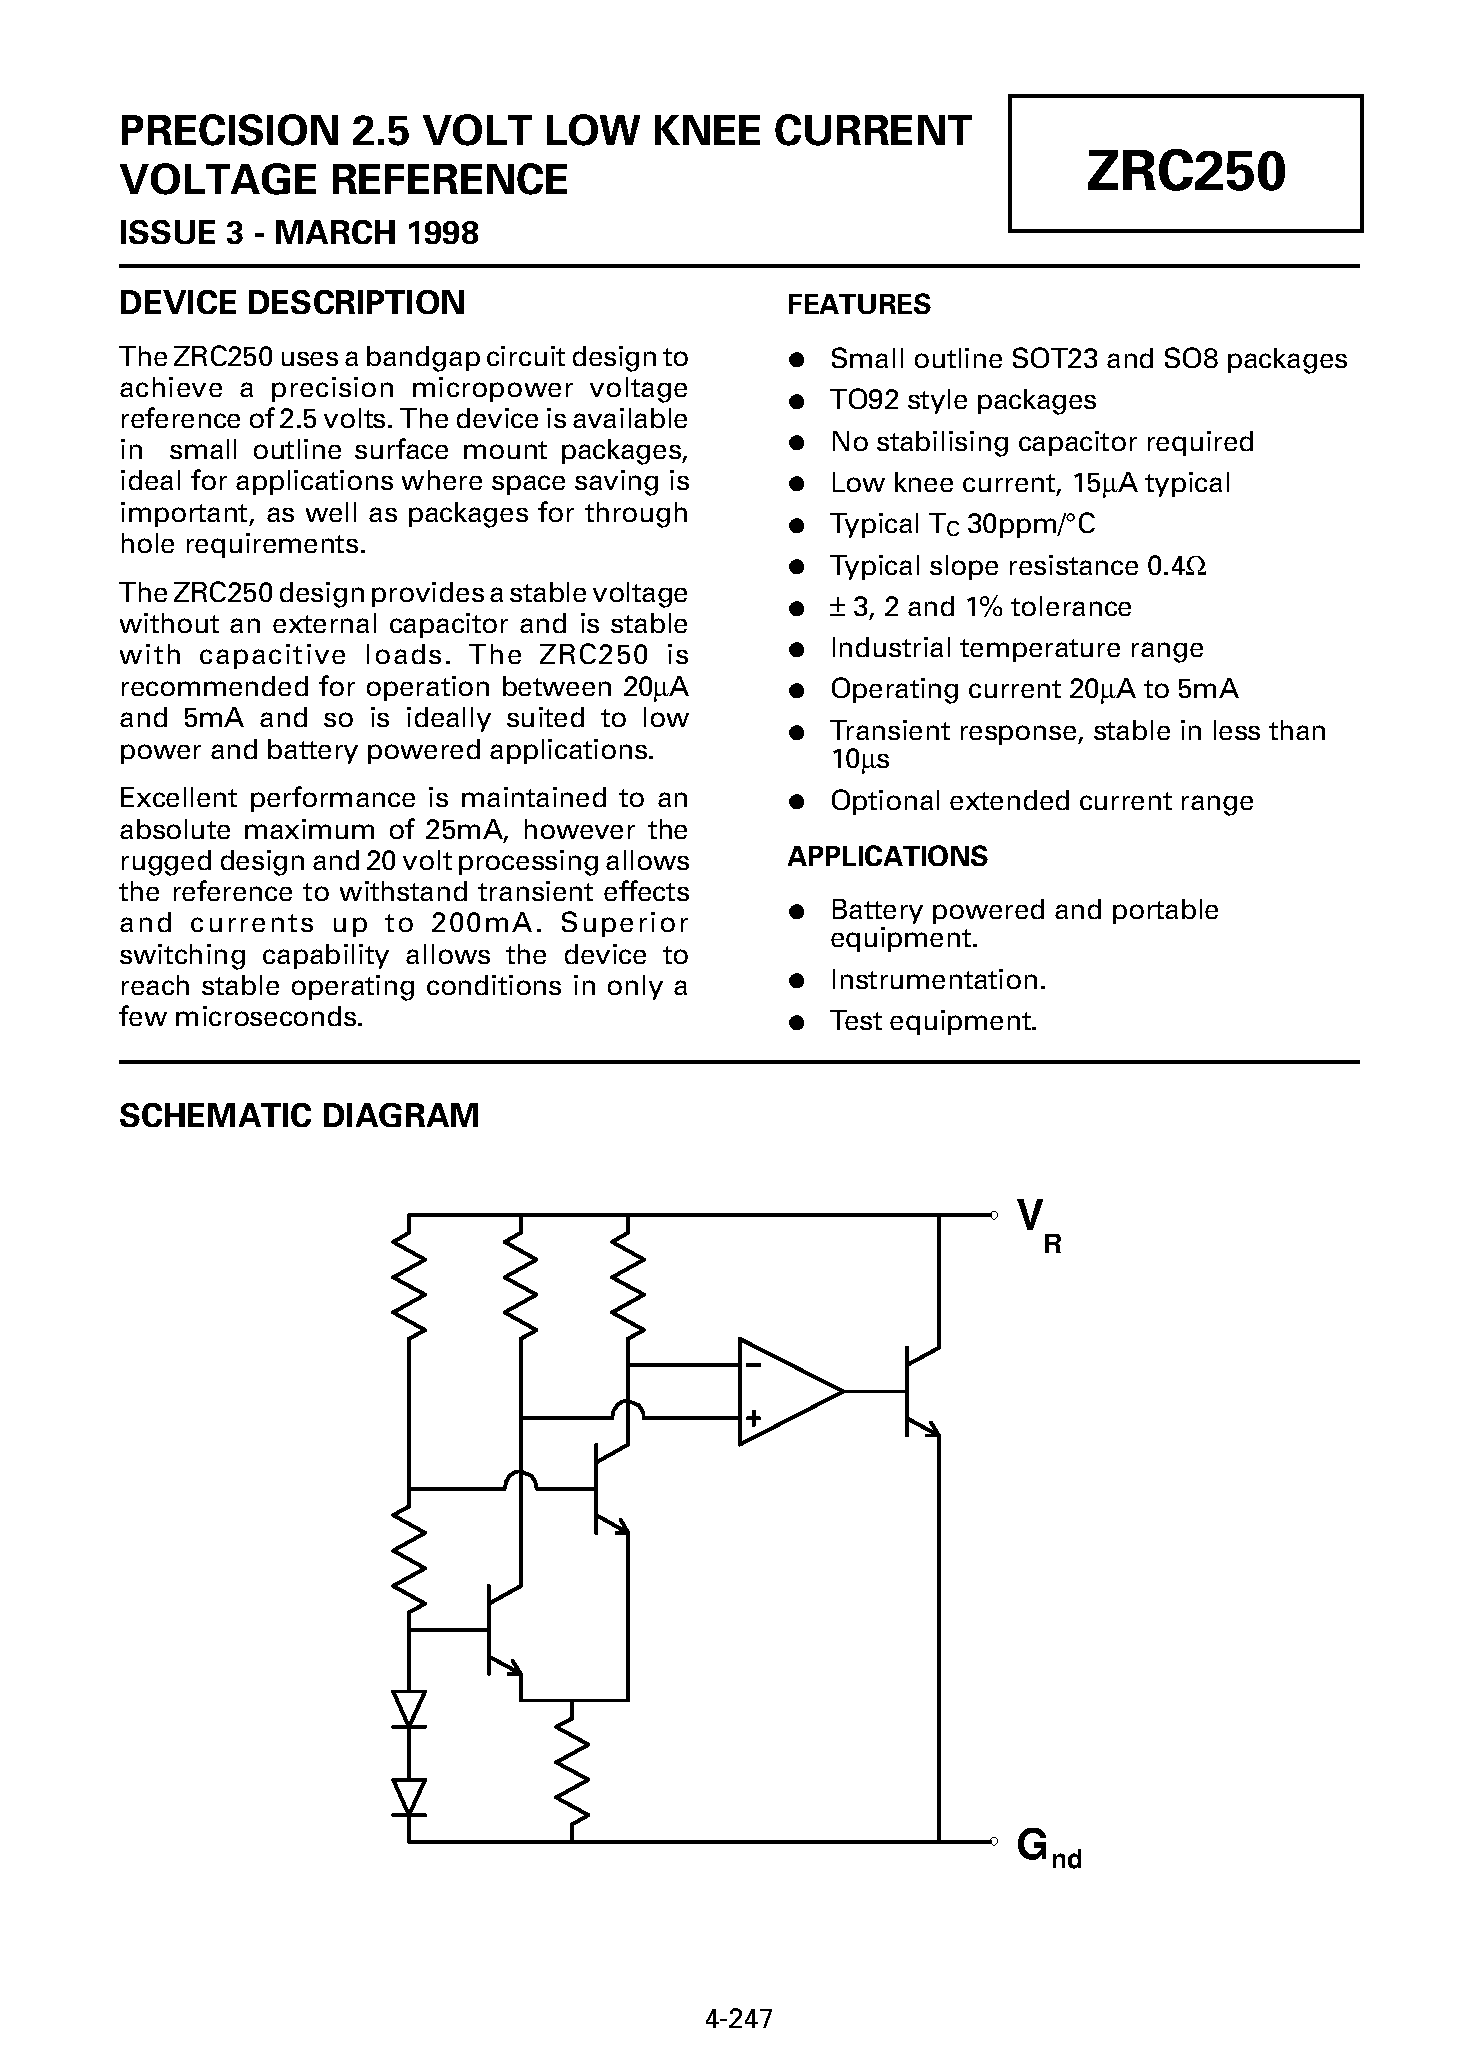 Datasheet ZRC250A03 - PRECISION 2.5 VOLT LOW KNEE CURRENT VOLTAGE REFERENCE page 1